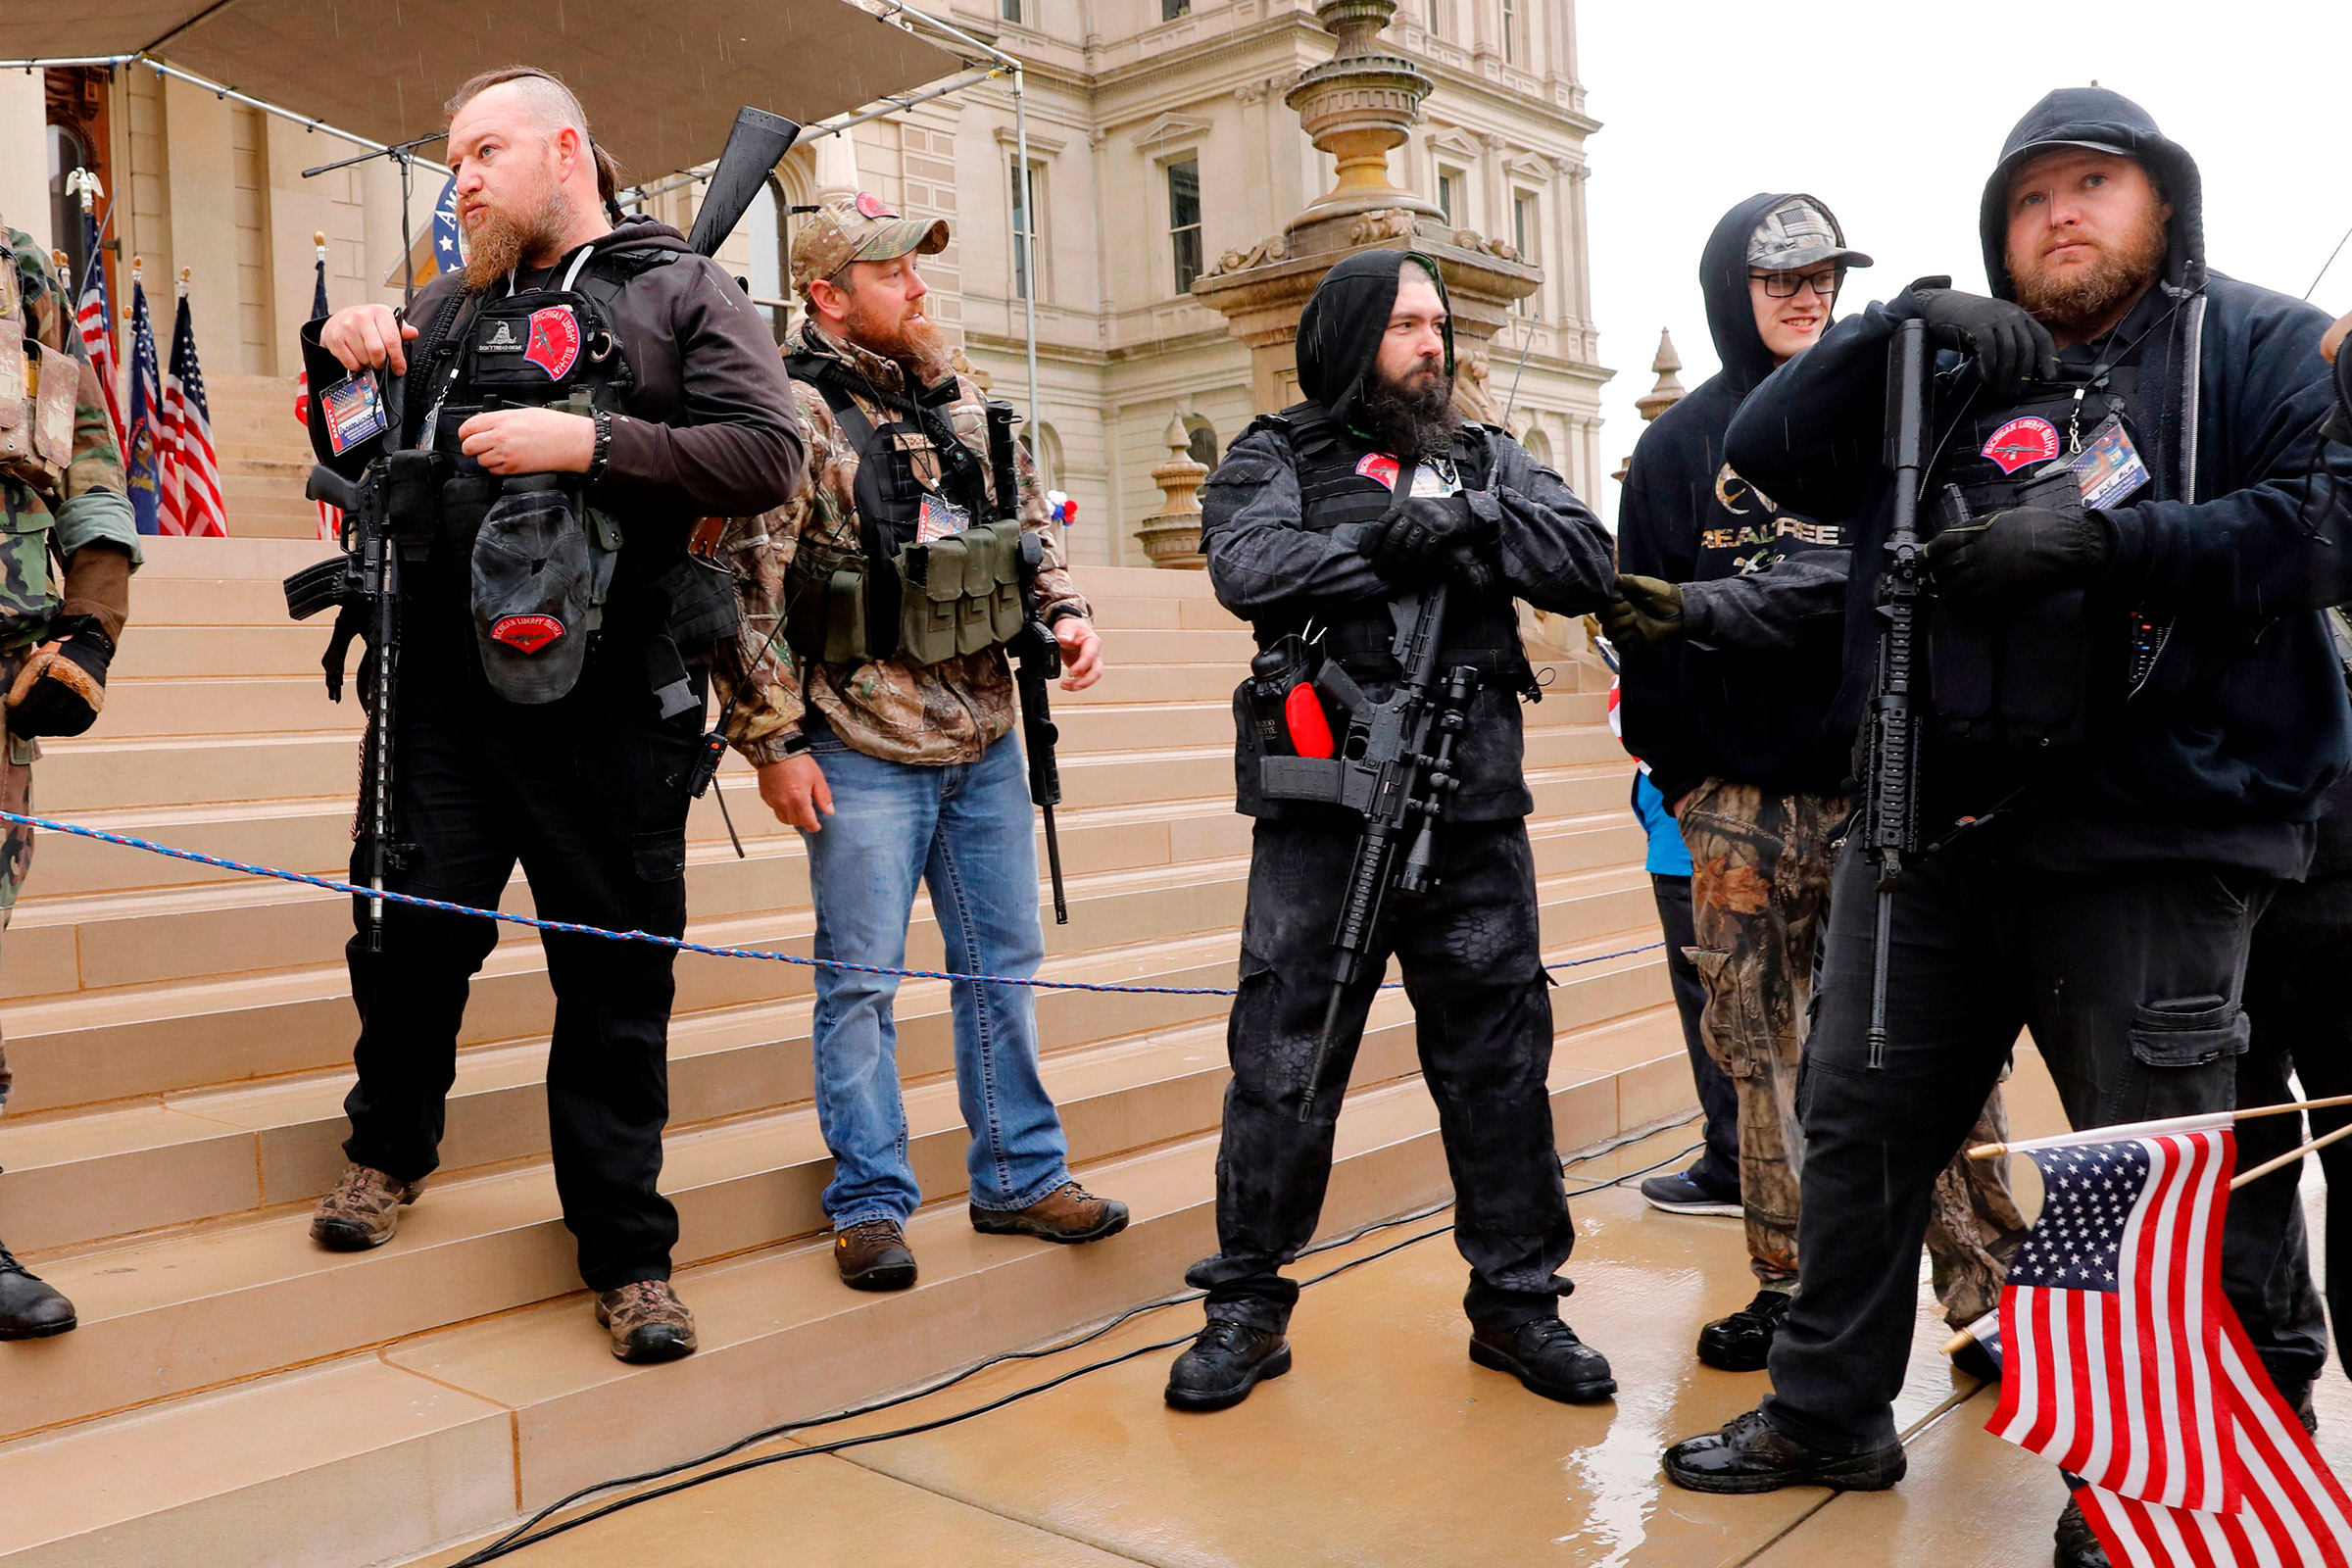 Michael Null (R) and William Null (L) arrive at the American Patriot Rally, to demand the reopening of businesses on the steps of the Michigan State Capitol in Lansing, Mich., on April 30, 2020. Thirteen men, including members of two right-wing militias, have been arrested for plotting to kidnap Michigan Gov. Gretchen Whitmer and "instigate a civil war", Michigan Attorney General Dana Nessel announced on October 8, 2020. The Nulls were charged for their alleged roles in the plot, according to the FBI. The brothers are charged with providing support for terroristic acts and felony weapons charges. (AFP via Getty Images&mdash;AFP or licensors)